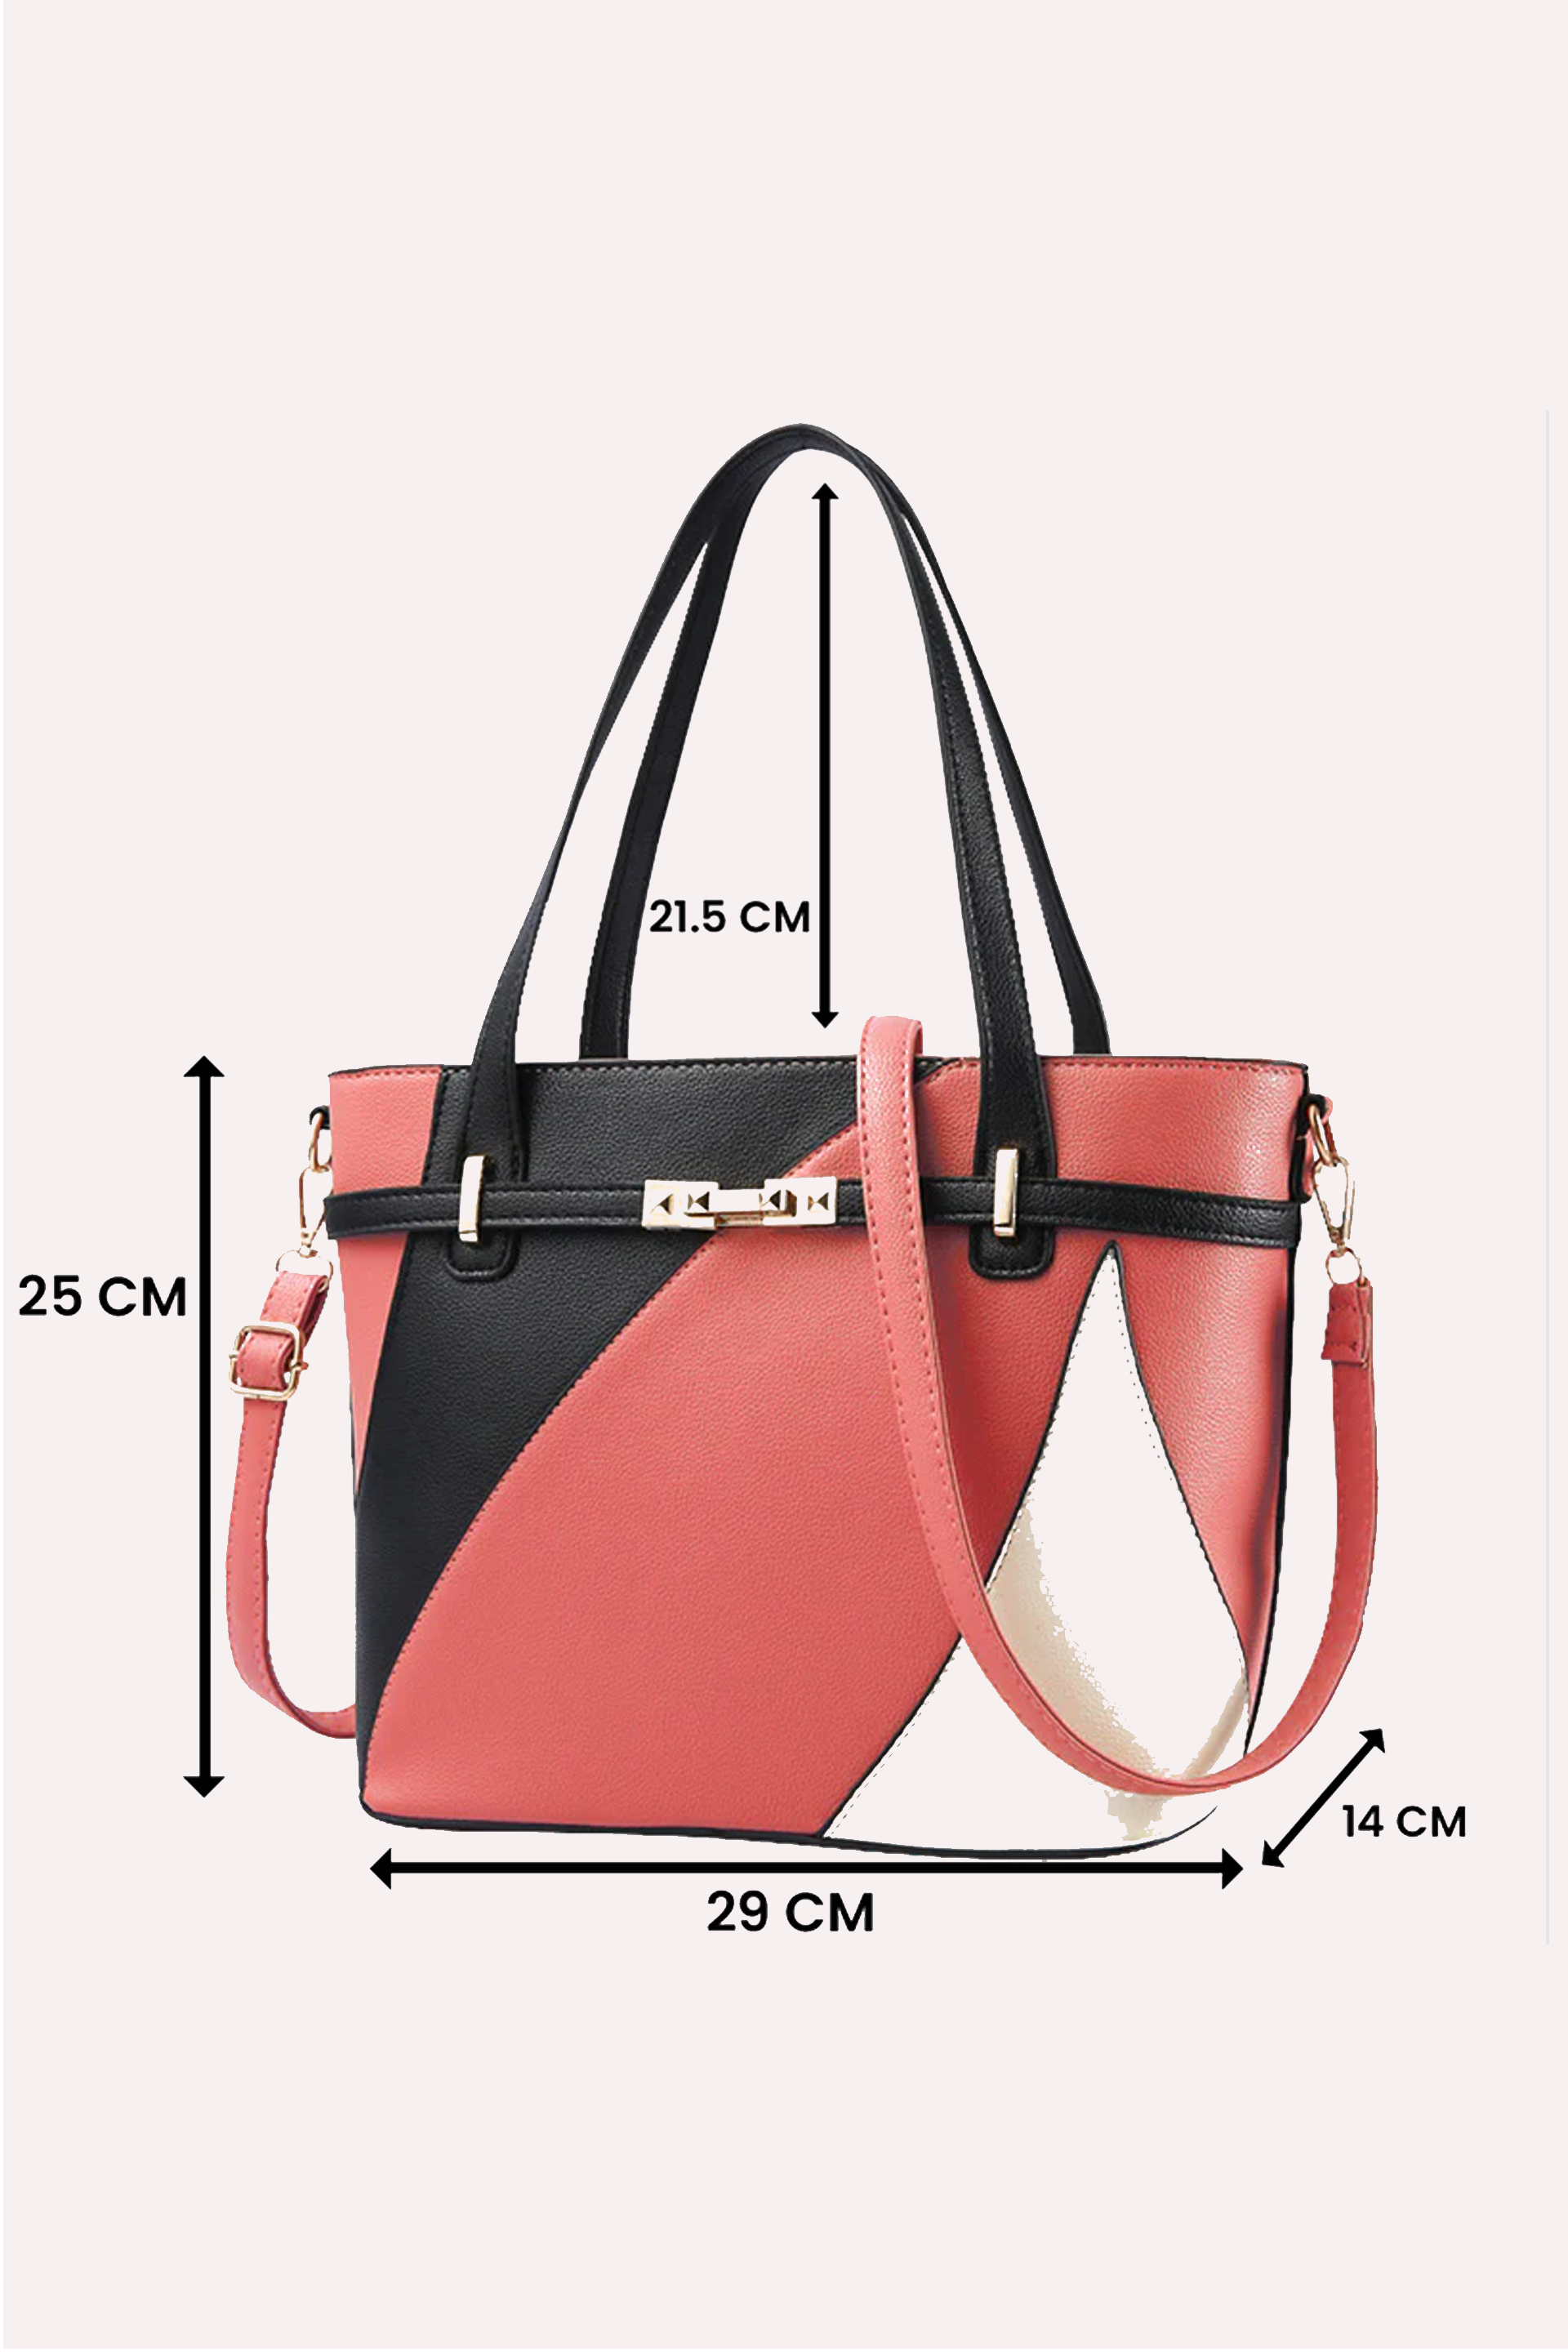 Source Fashion girls new model college college bags laptops backpack on  m.alibaba.com